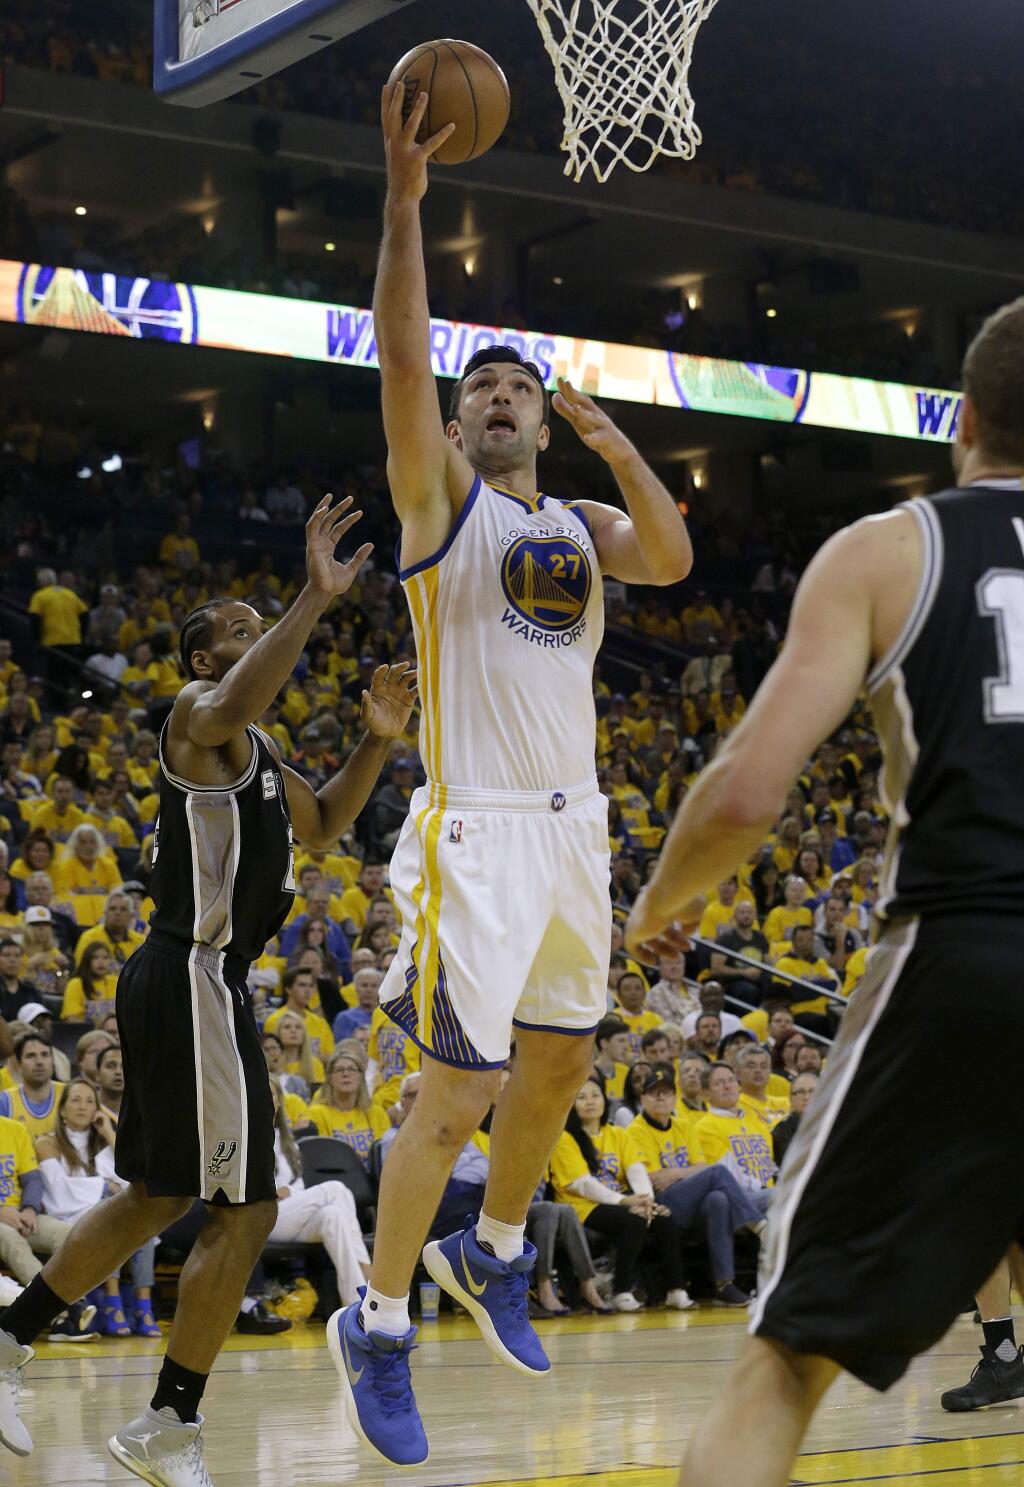 Golden State Warriors center Zaza Pachulia (27) shoots against the San Antonio Spurs during Game 1 of the NBA basketball Western Conference finals in Oakland, Calif., Sunday, May 14, 2017. (AP Photo/Jeff Chiu)